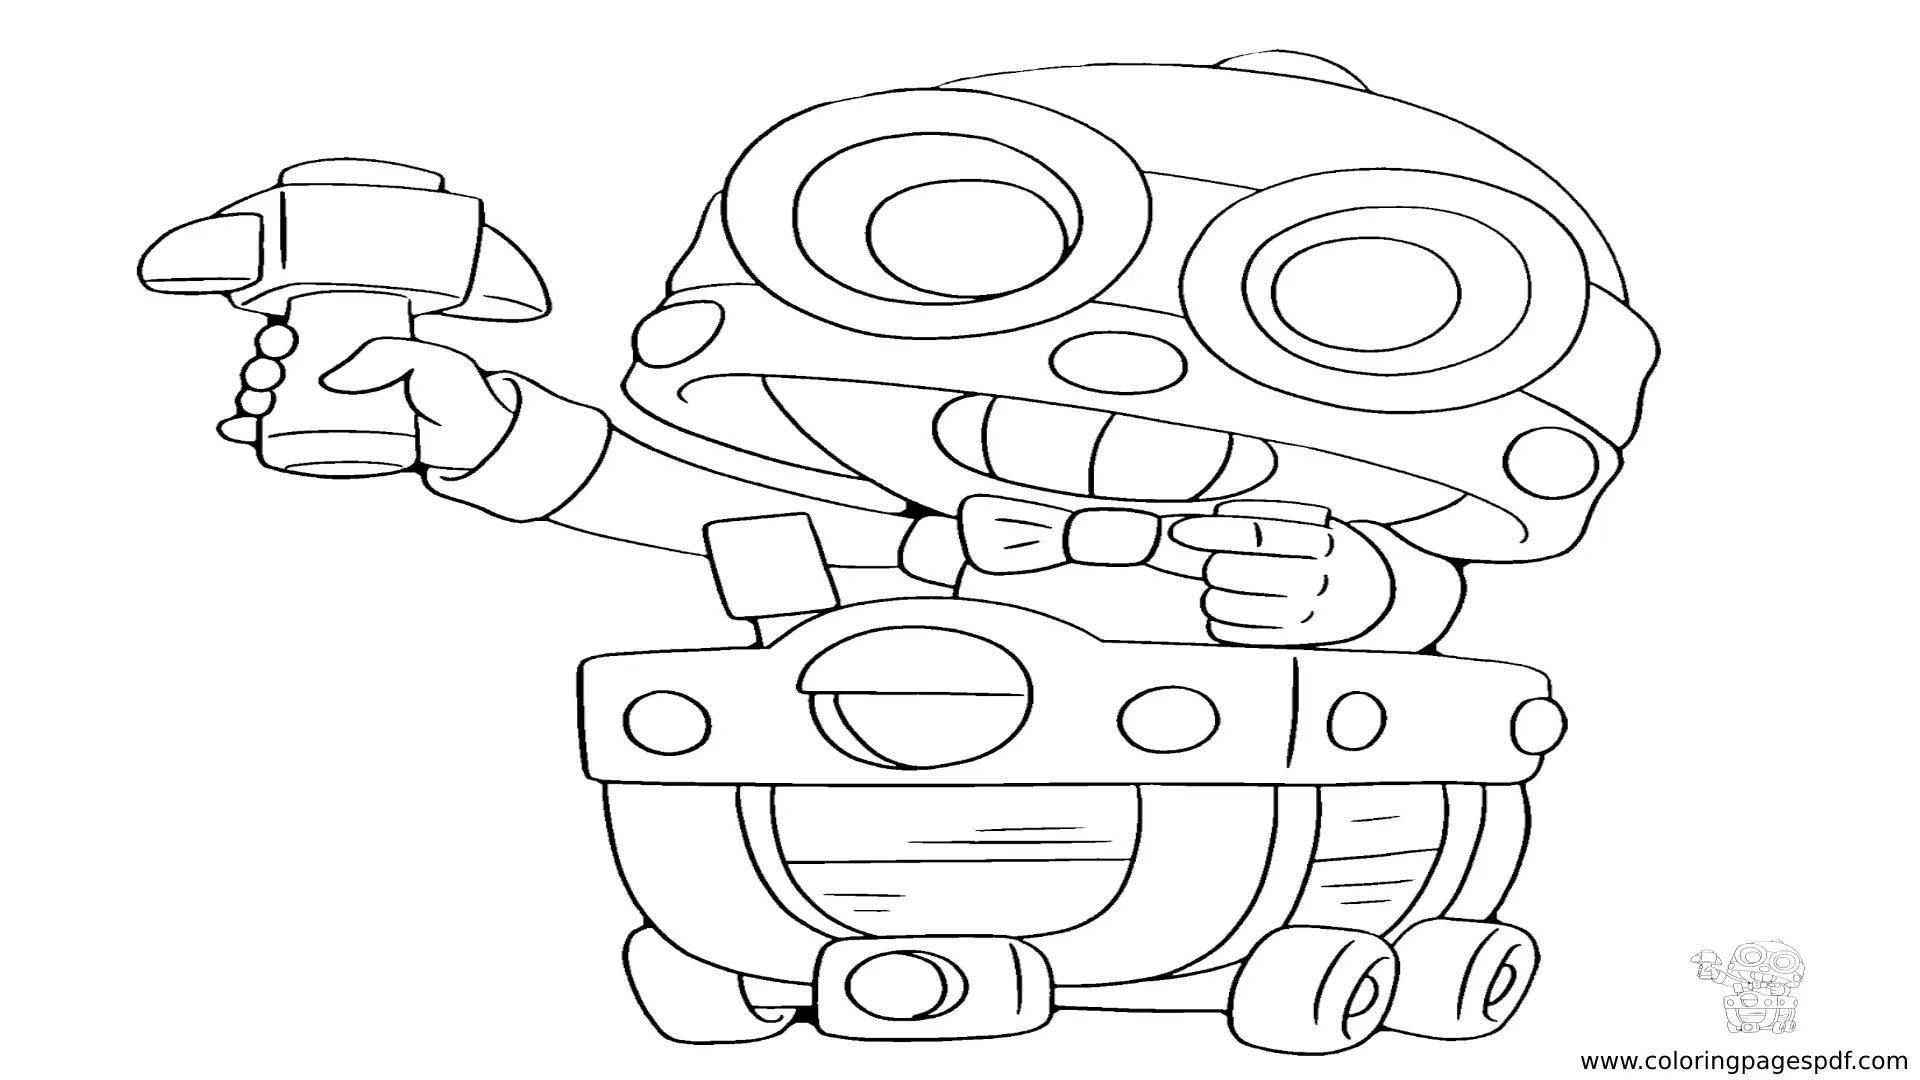 Coloring Pages Of Carl From Brawl Stars